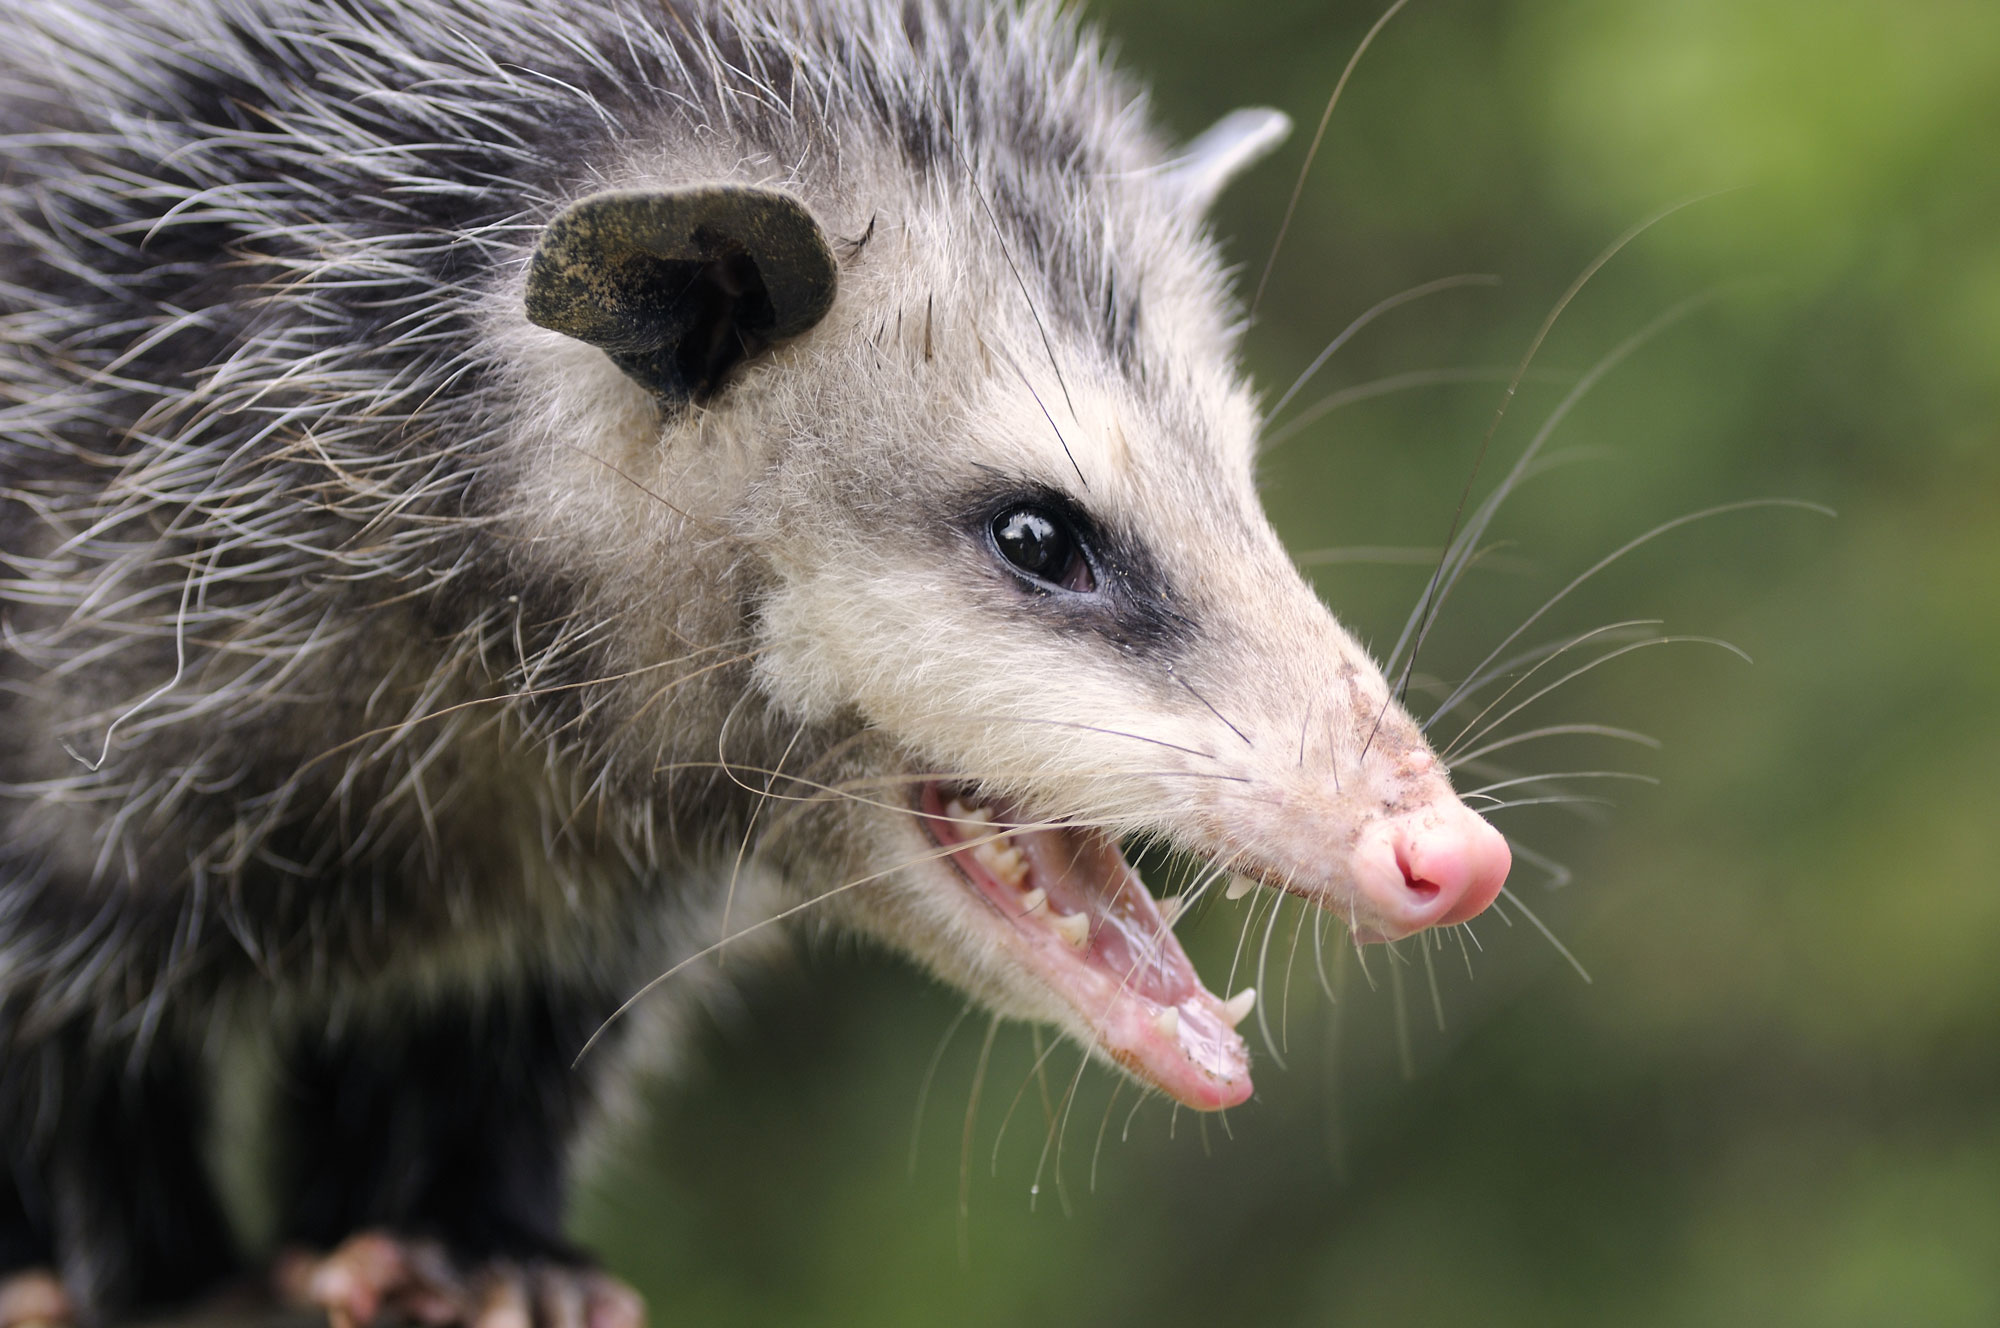 An opossum with its teeth out.